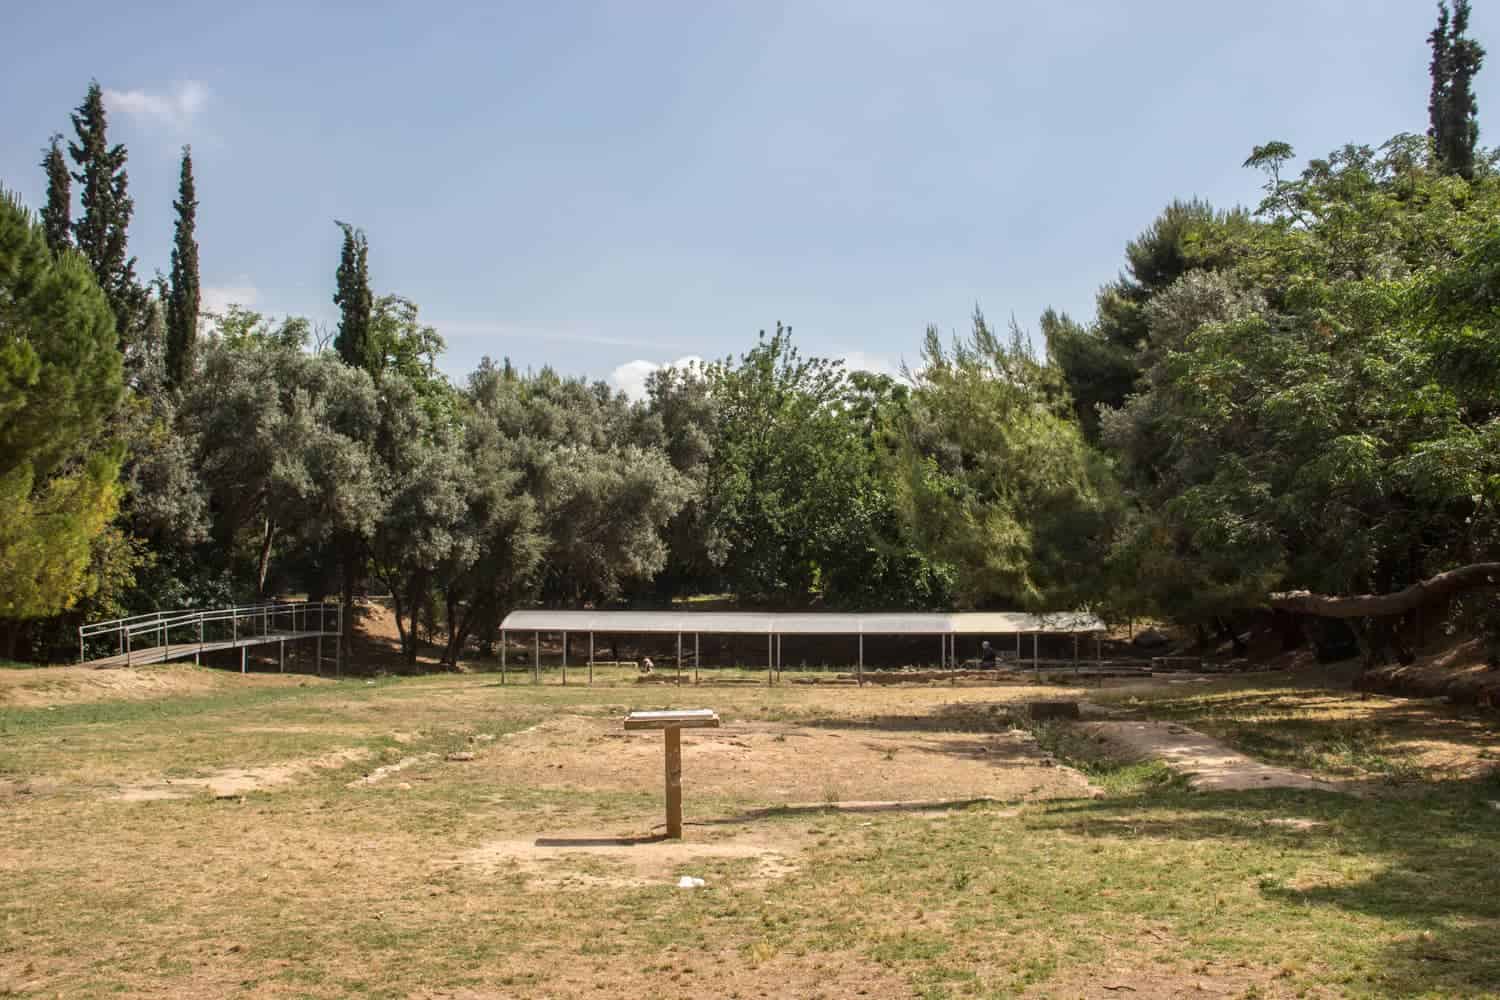 A bare field surrounded by trees, with a square indent of an old building in the middle and in the background, a line of ruins covered by a metal roof. Part Plato's Academy in Athen's. 